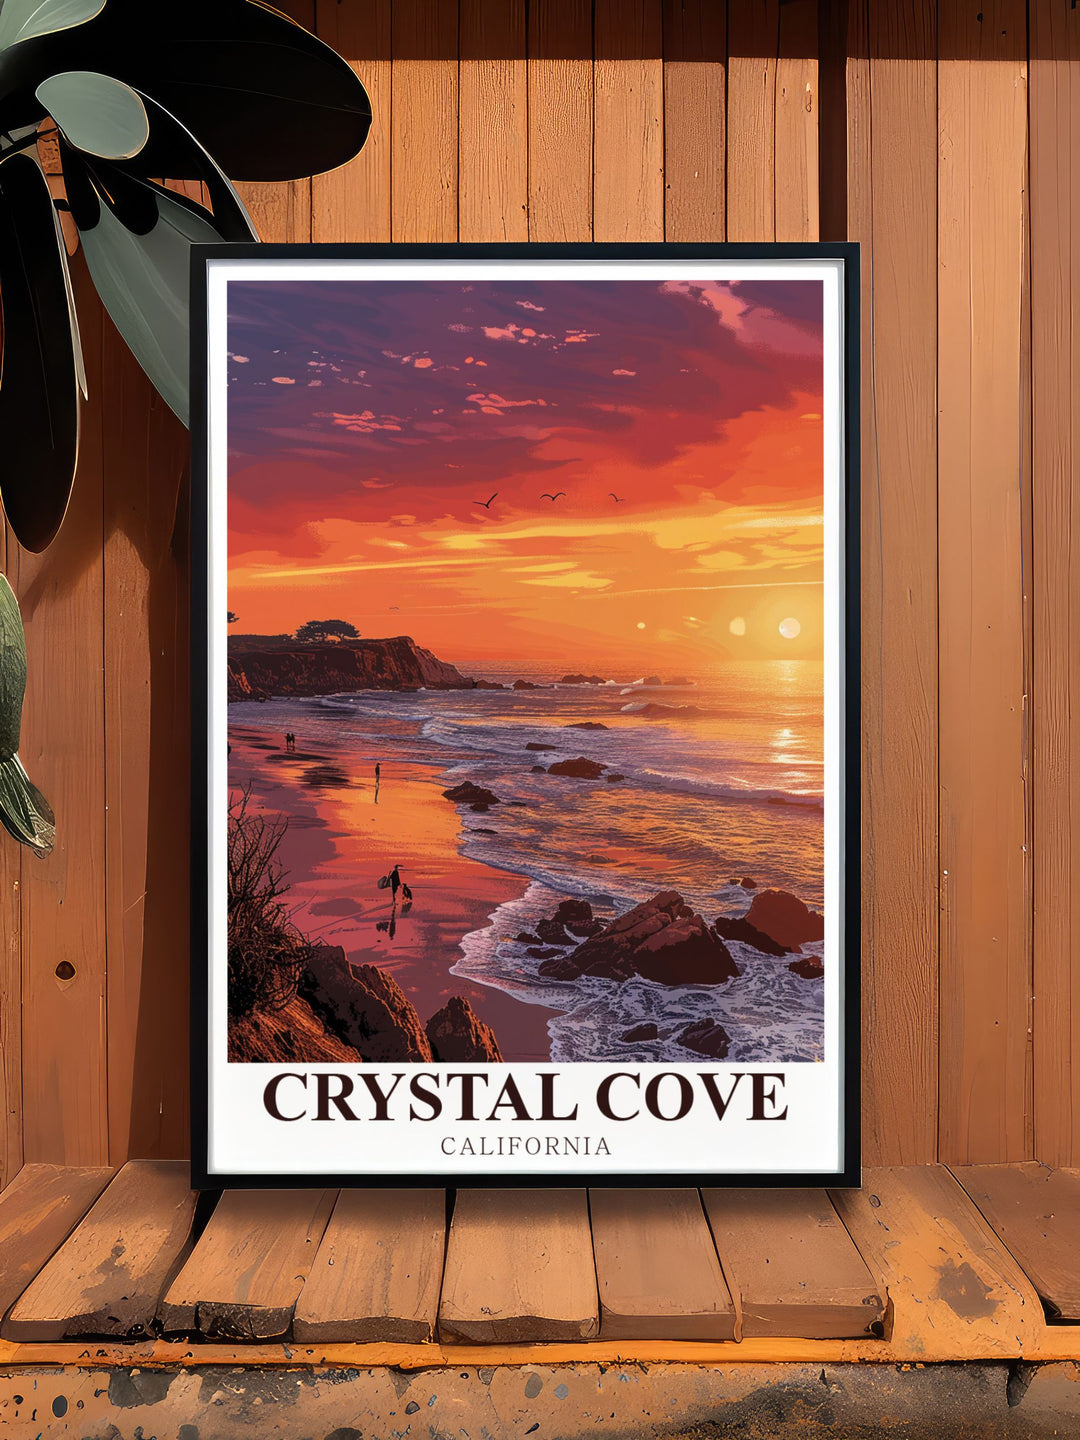 Celebrate the beauty of California with Crystal Cove Beach prints ideal for transforming any room into a coastal haven these artworks showcase the stunning scenery of Crystal Cove Beach and make a perfect addition to your home decor.